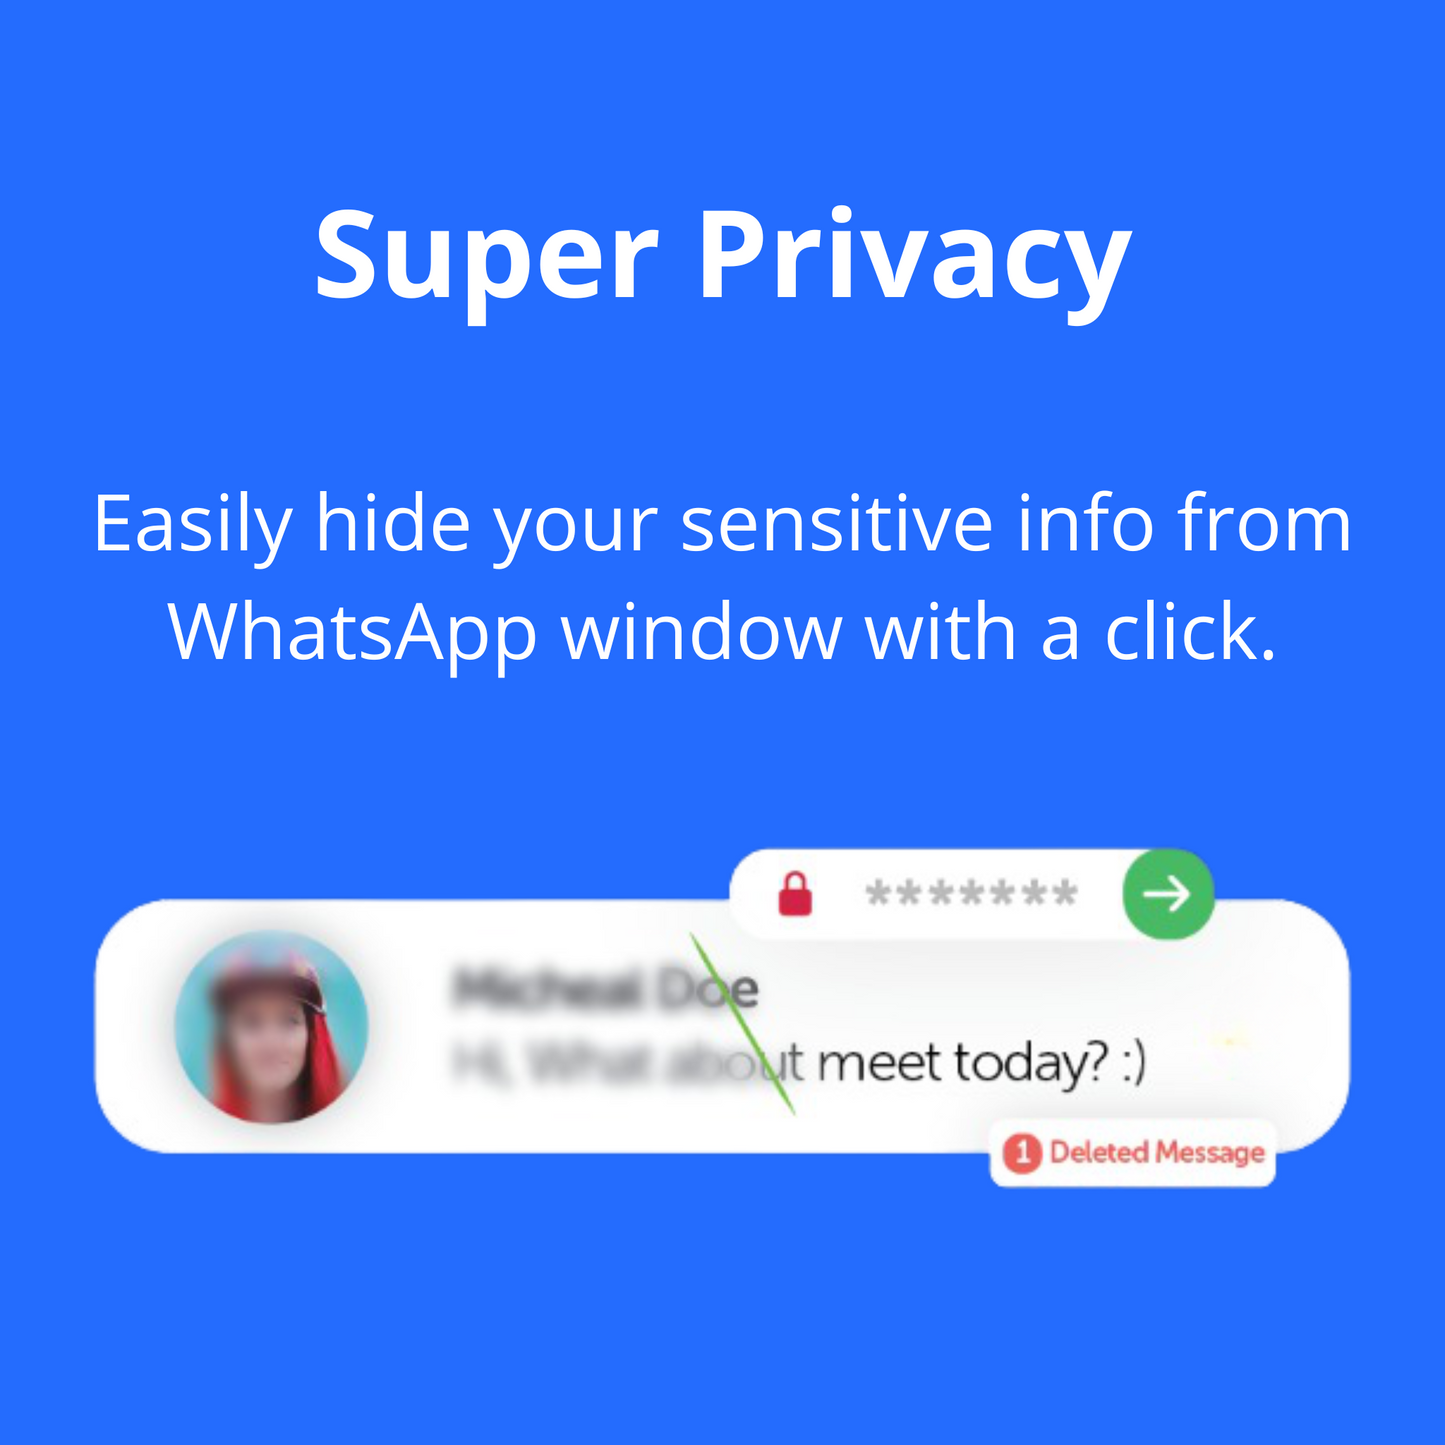 Golden Value SG's WA Web Plus (12 Months Plan) - Automate your WhatsApp tasks allows you to hide your sensitive information from the WhatsApp window with a click, ensuring super privacy.